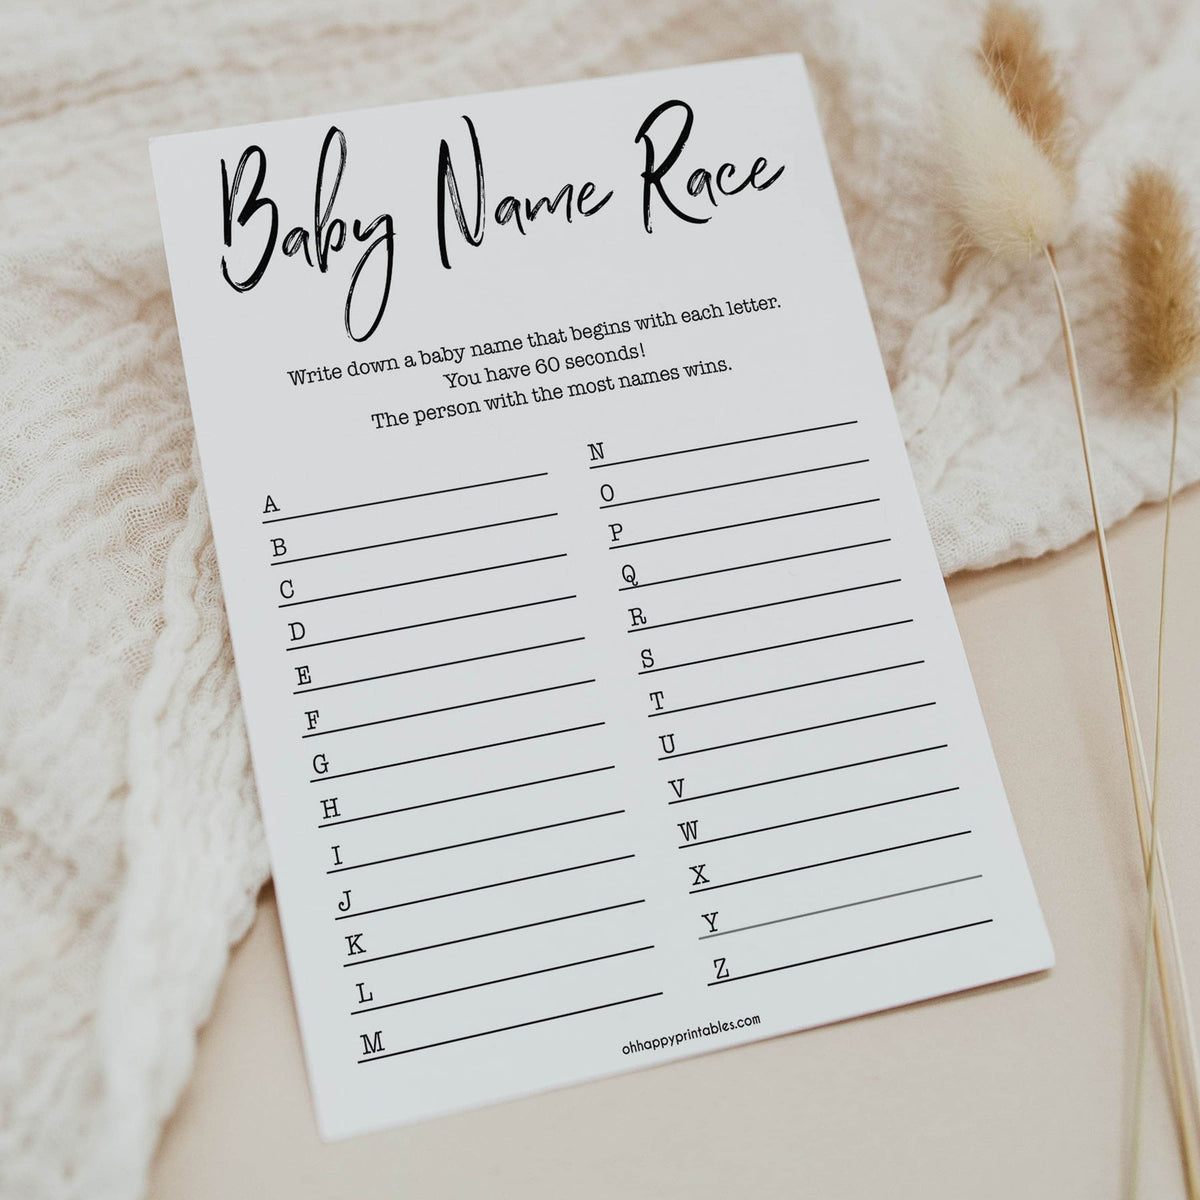 gender neutral baby shower games, baby name race, baby games, printable baby shower, popular baby games, fun baby games, baby shower games